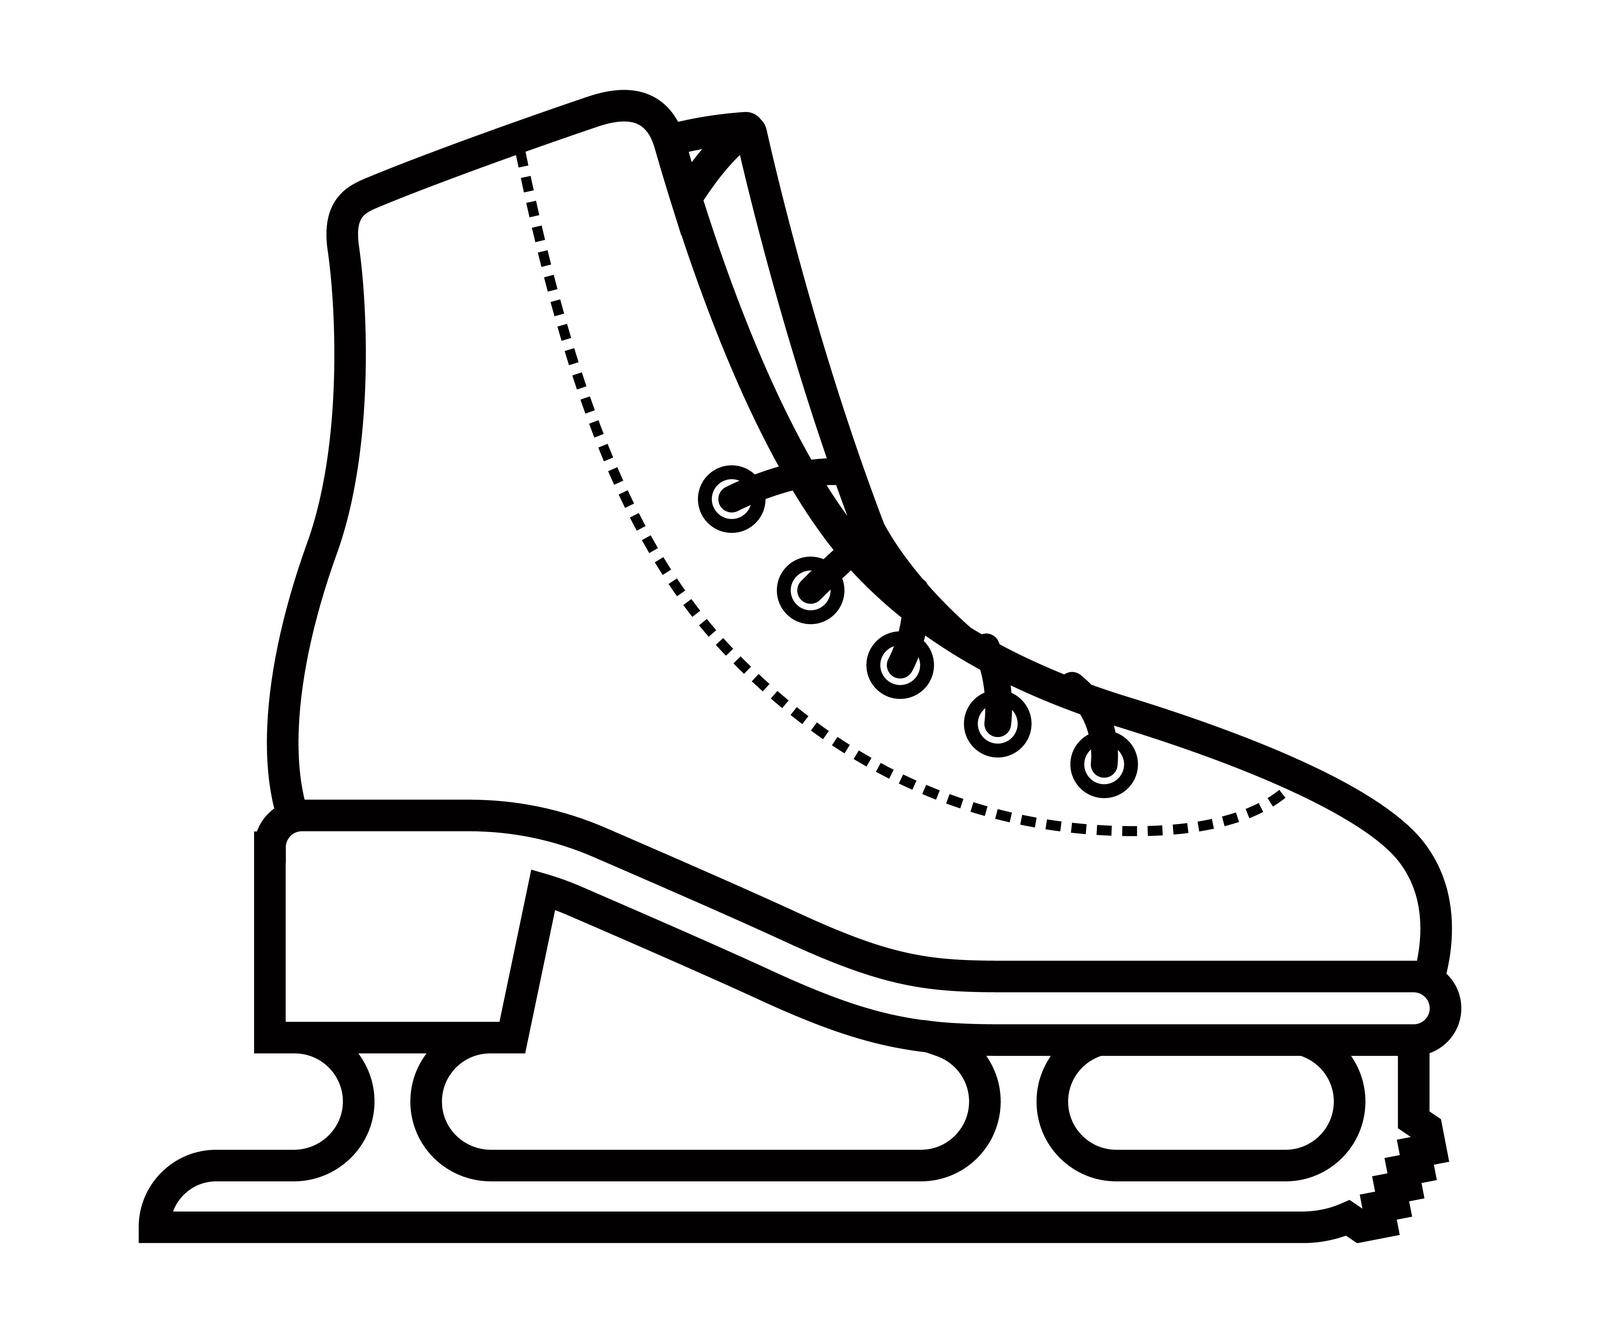 black linear icon of skate for skating on ice in winter. flat vector illustration.